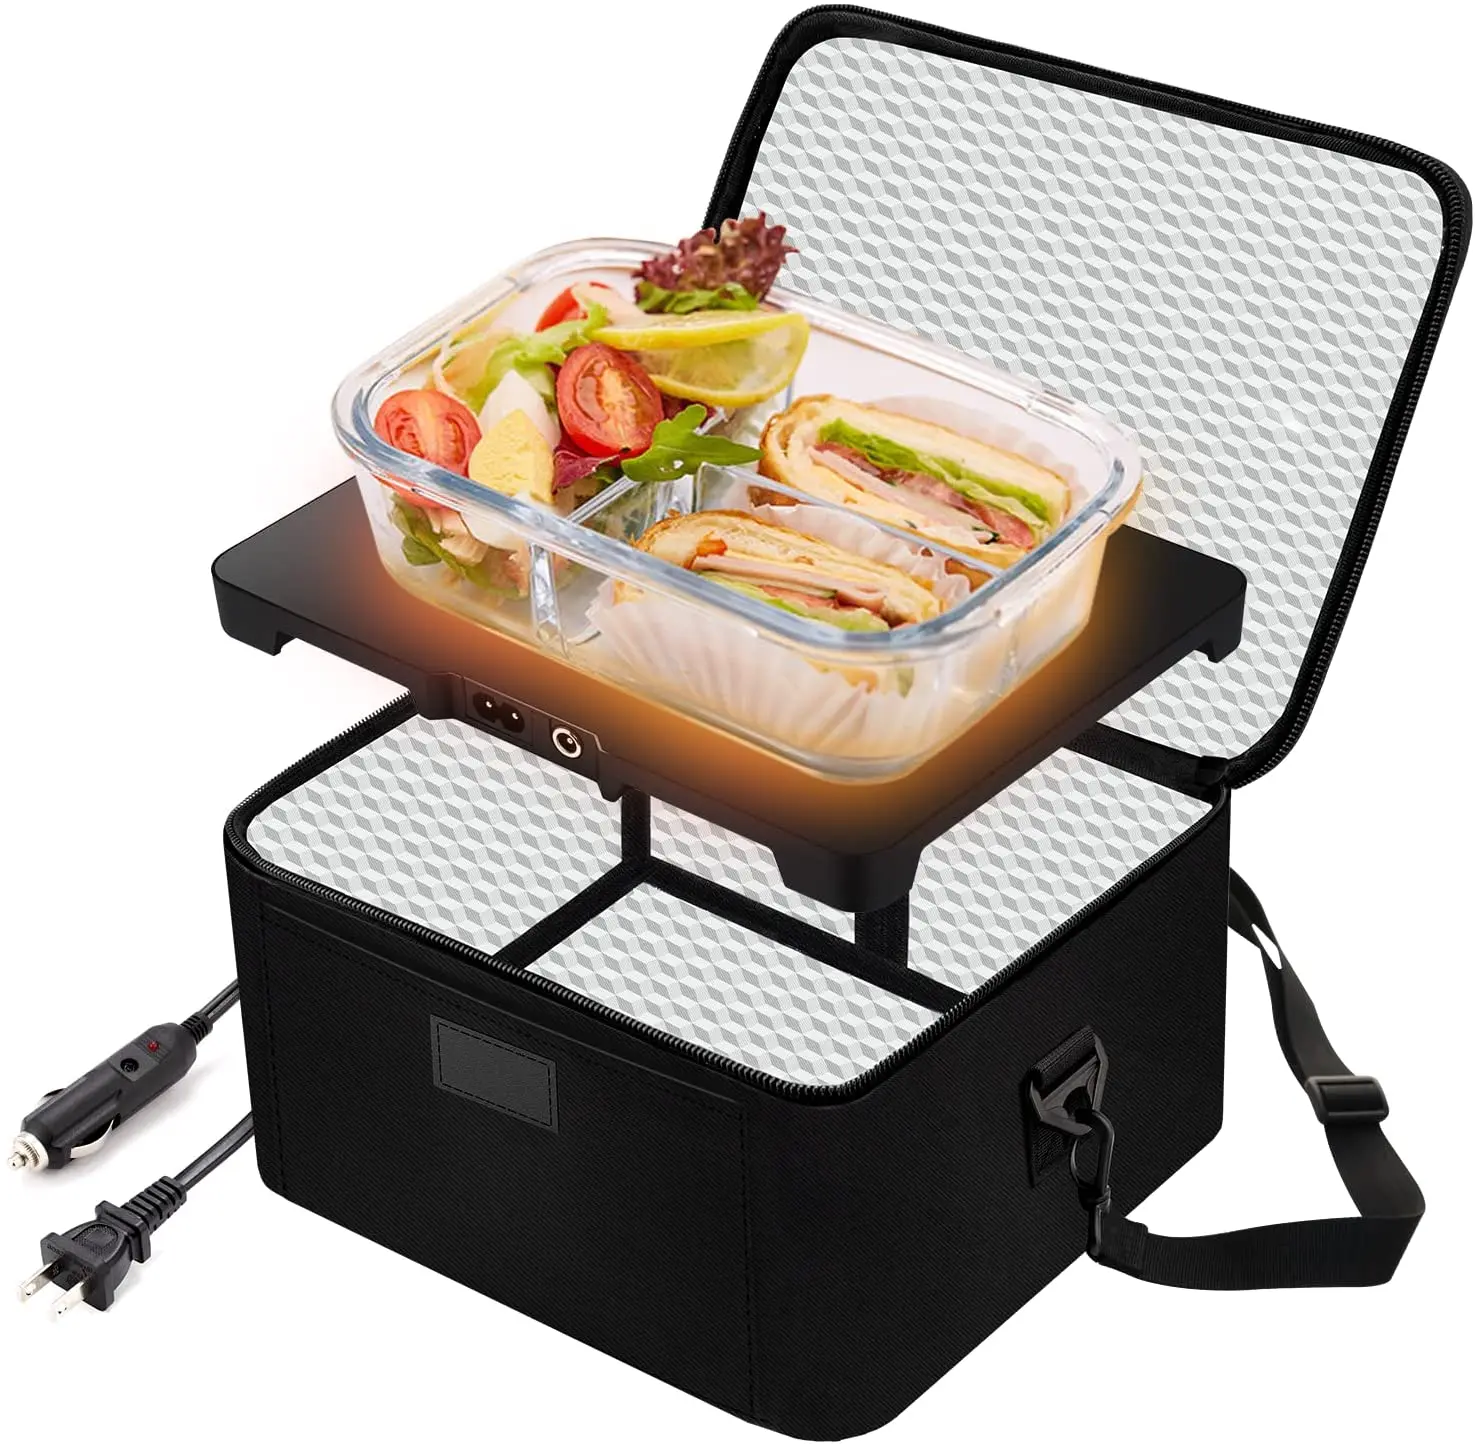 Portable Electric Lunch Box 12V Food Warmer Mini Microwave Oven for Car